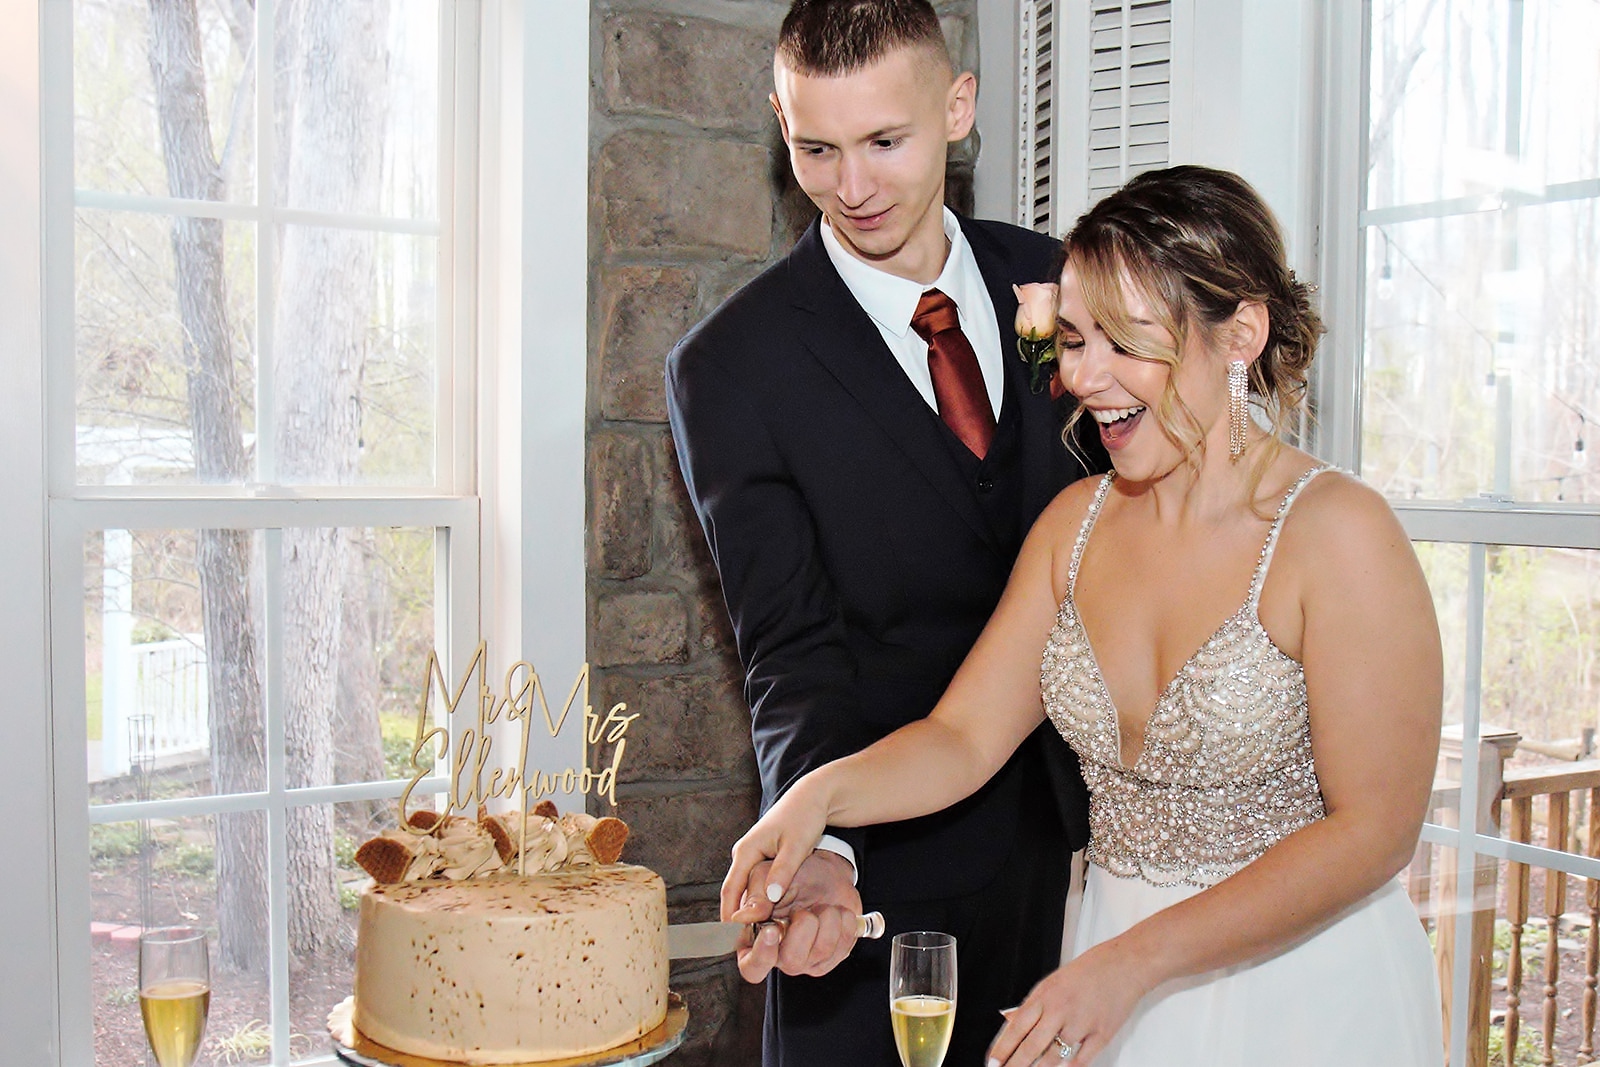 Newlyweds are cutting the cake -- the first sweet test of married life.